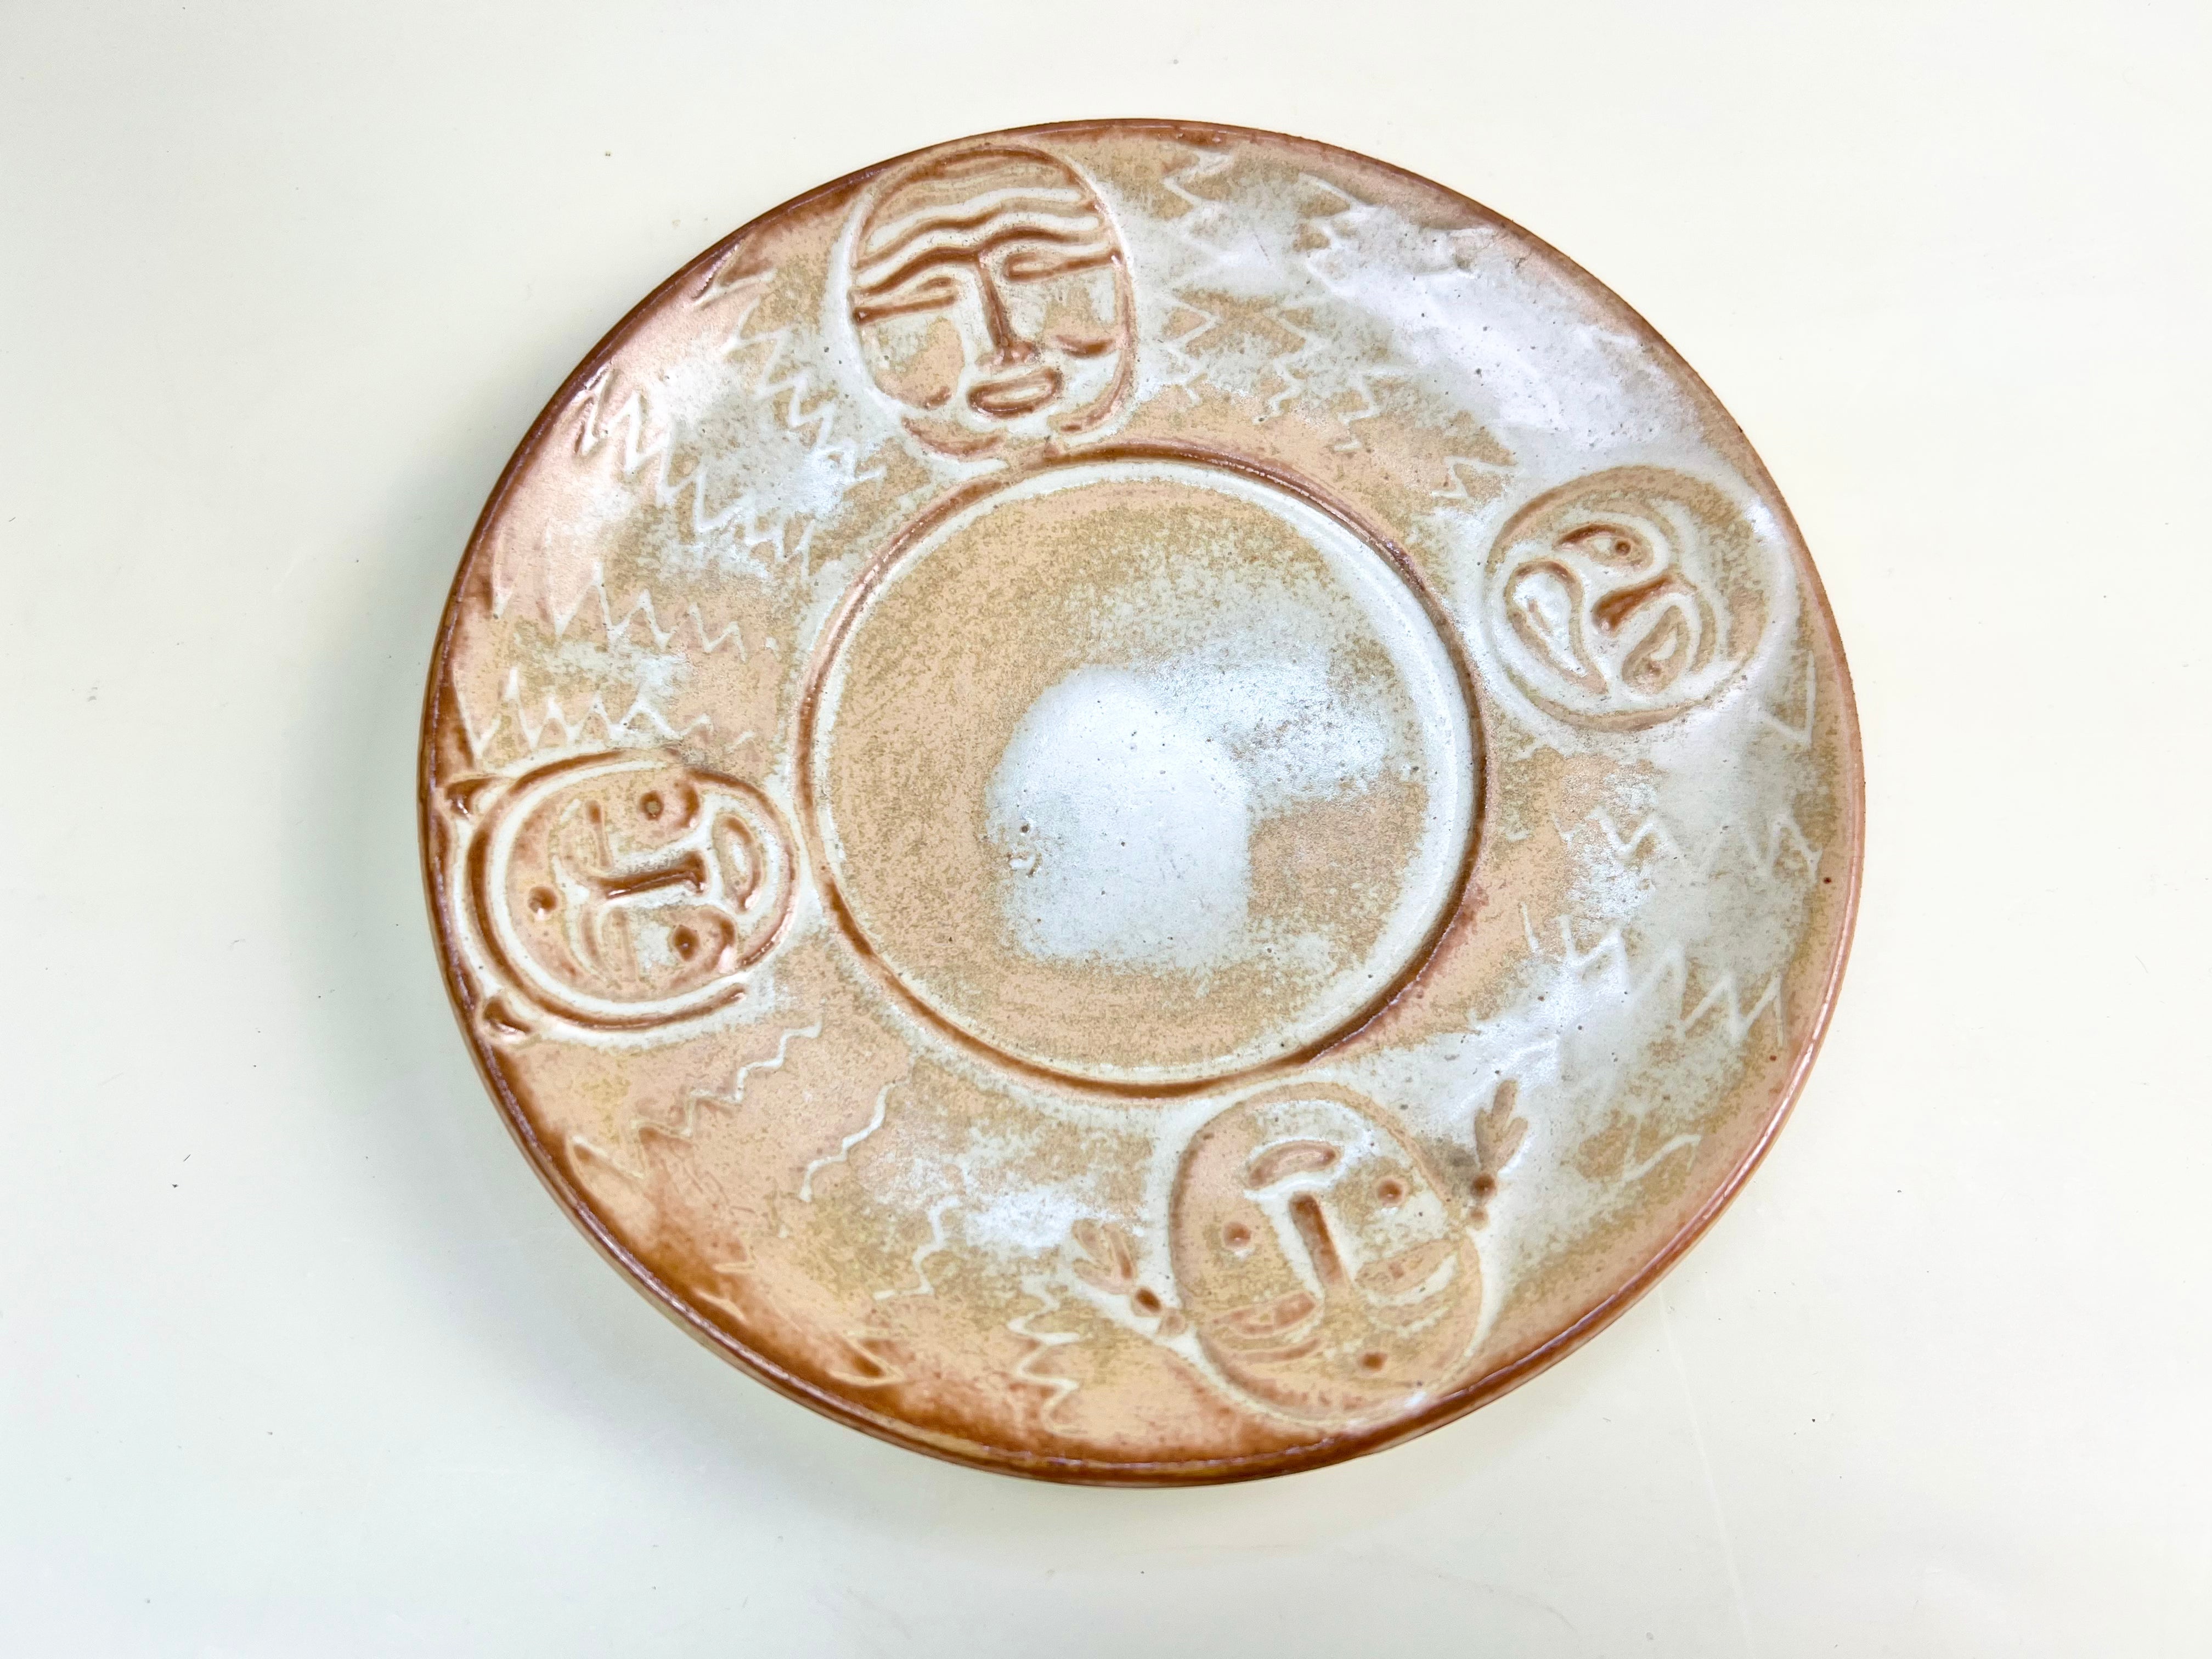 Beige Glazed Studio Pottery Saucer with 4 Faces